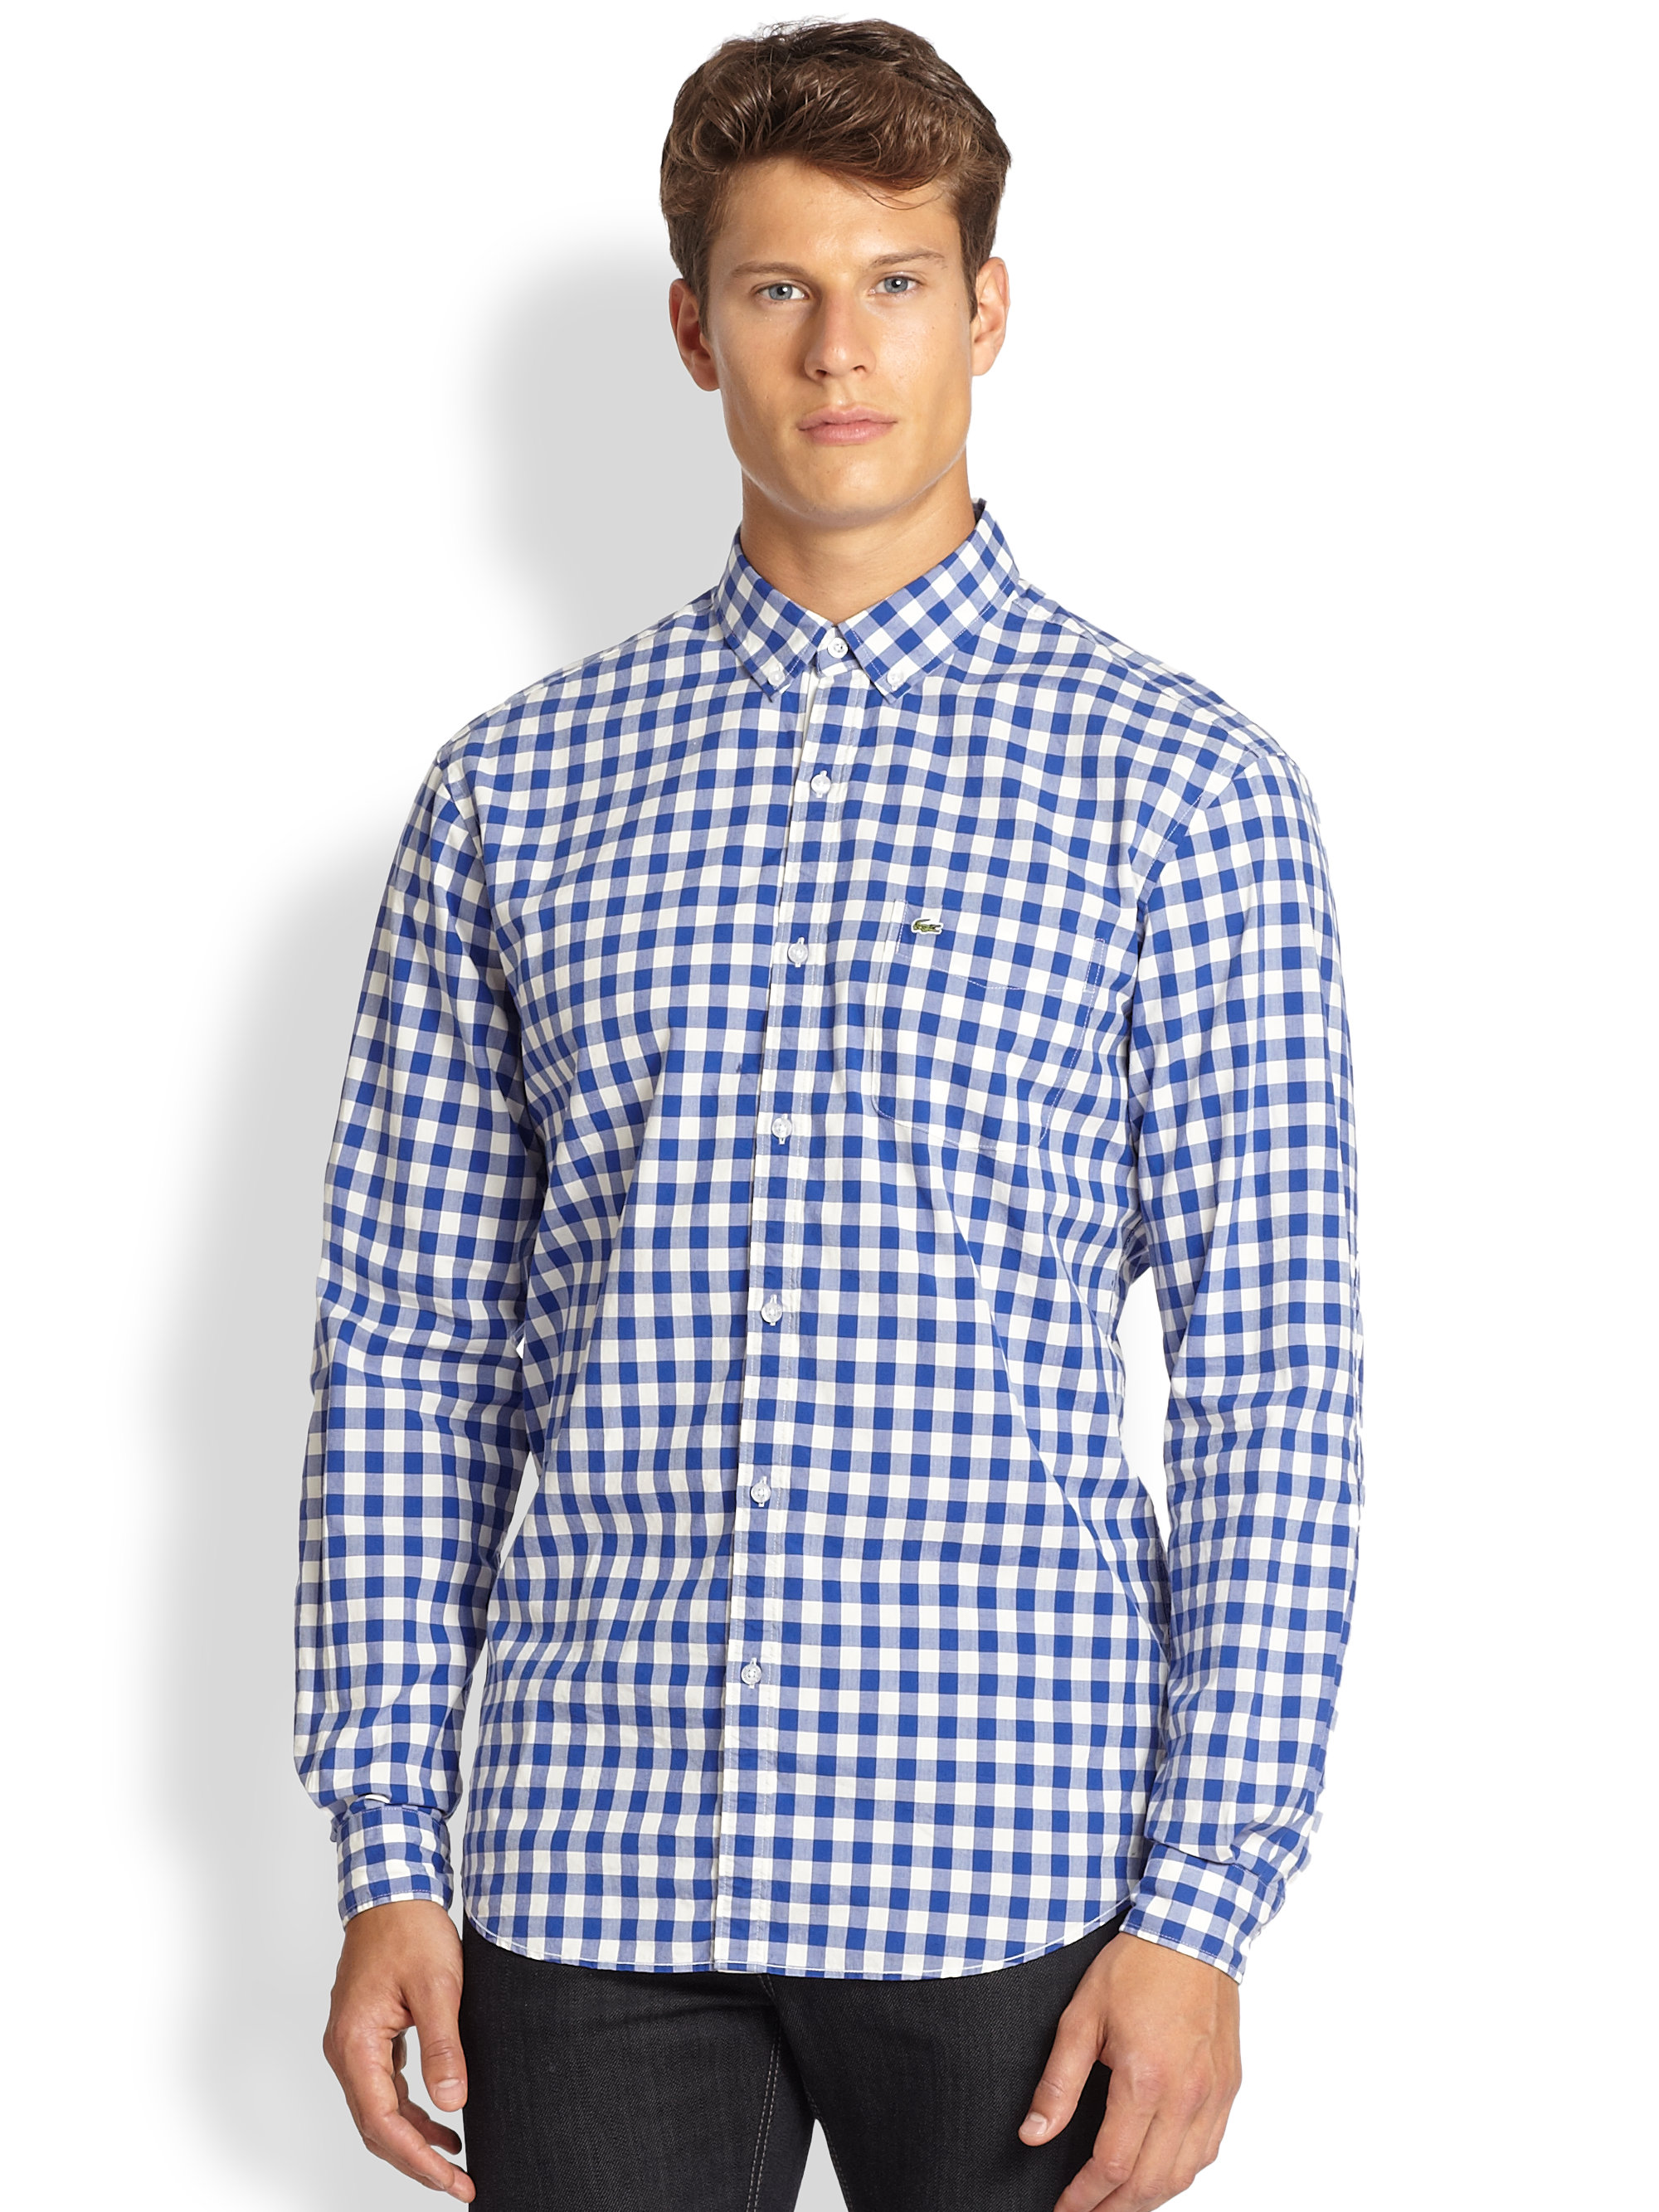 lacoste checkered shirt